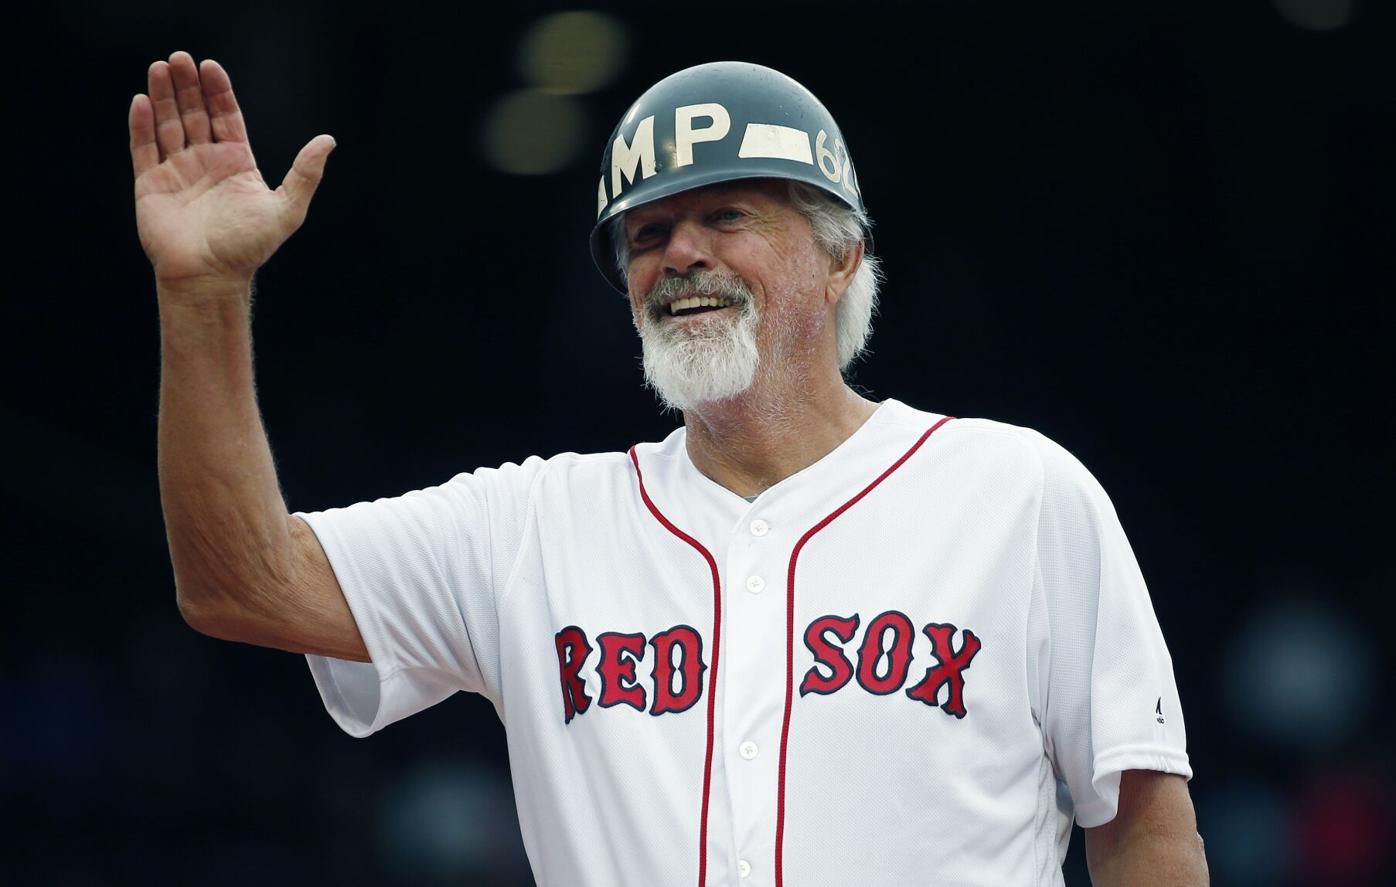 Howard Herman | Designated Hitter: Catching up with Spaceman Bill Lee, a  Pittsfield Red Sox veteran | Sports 